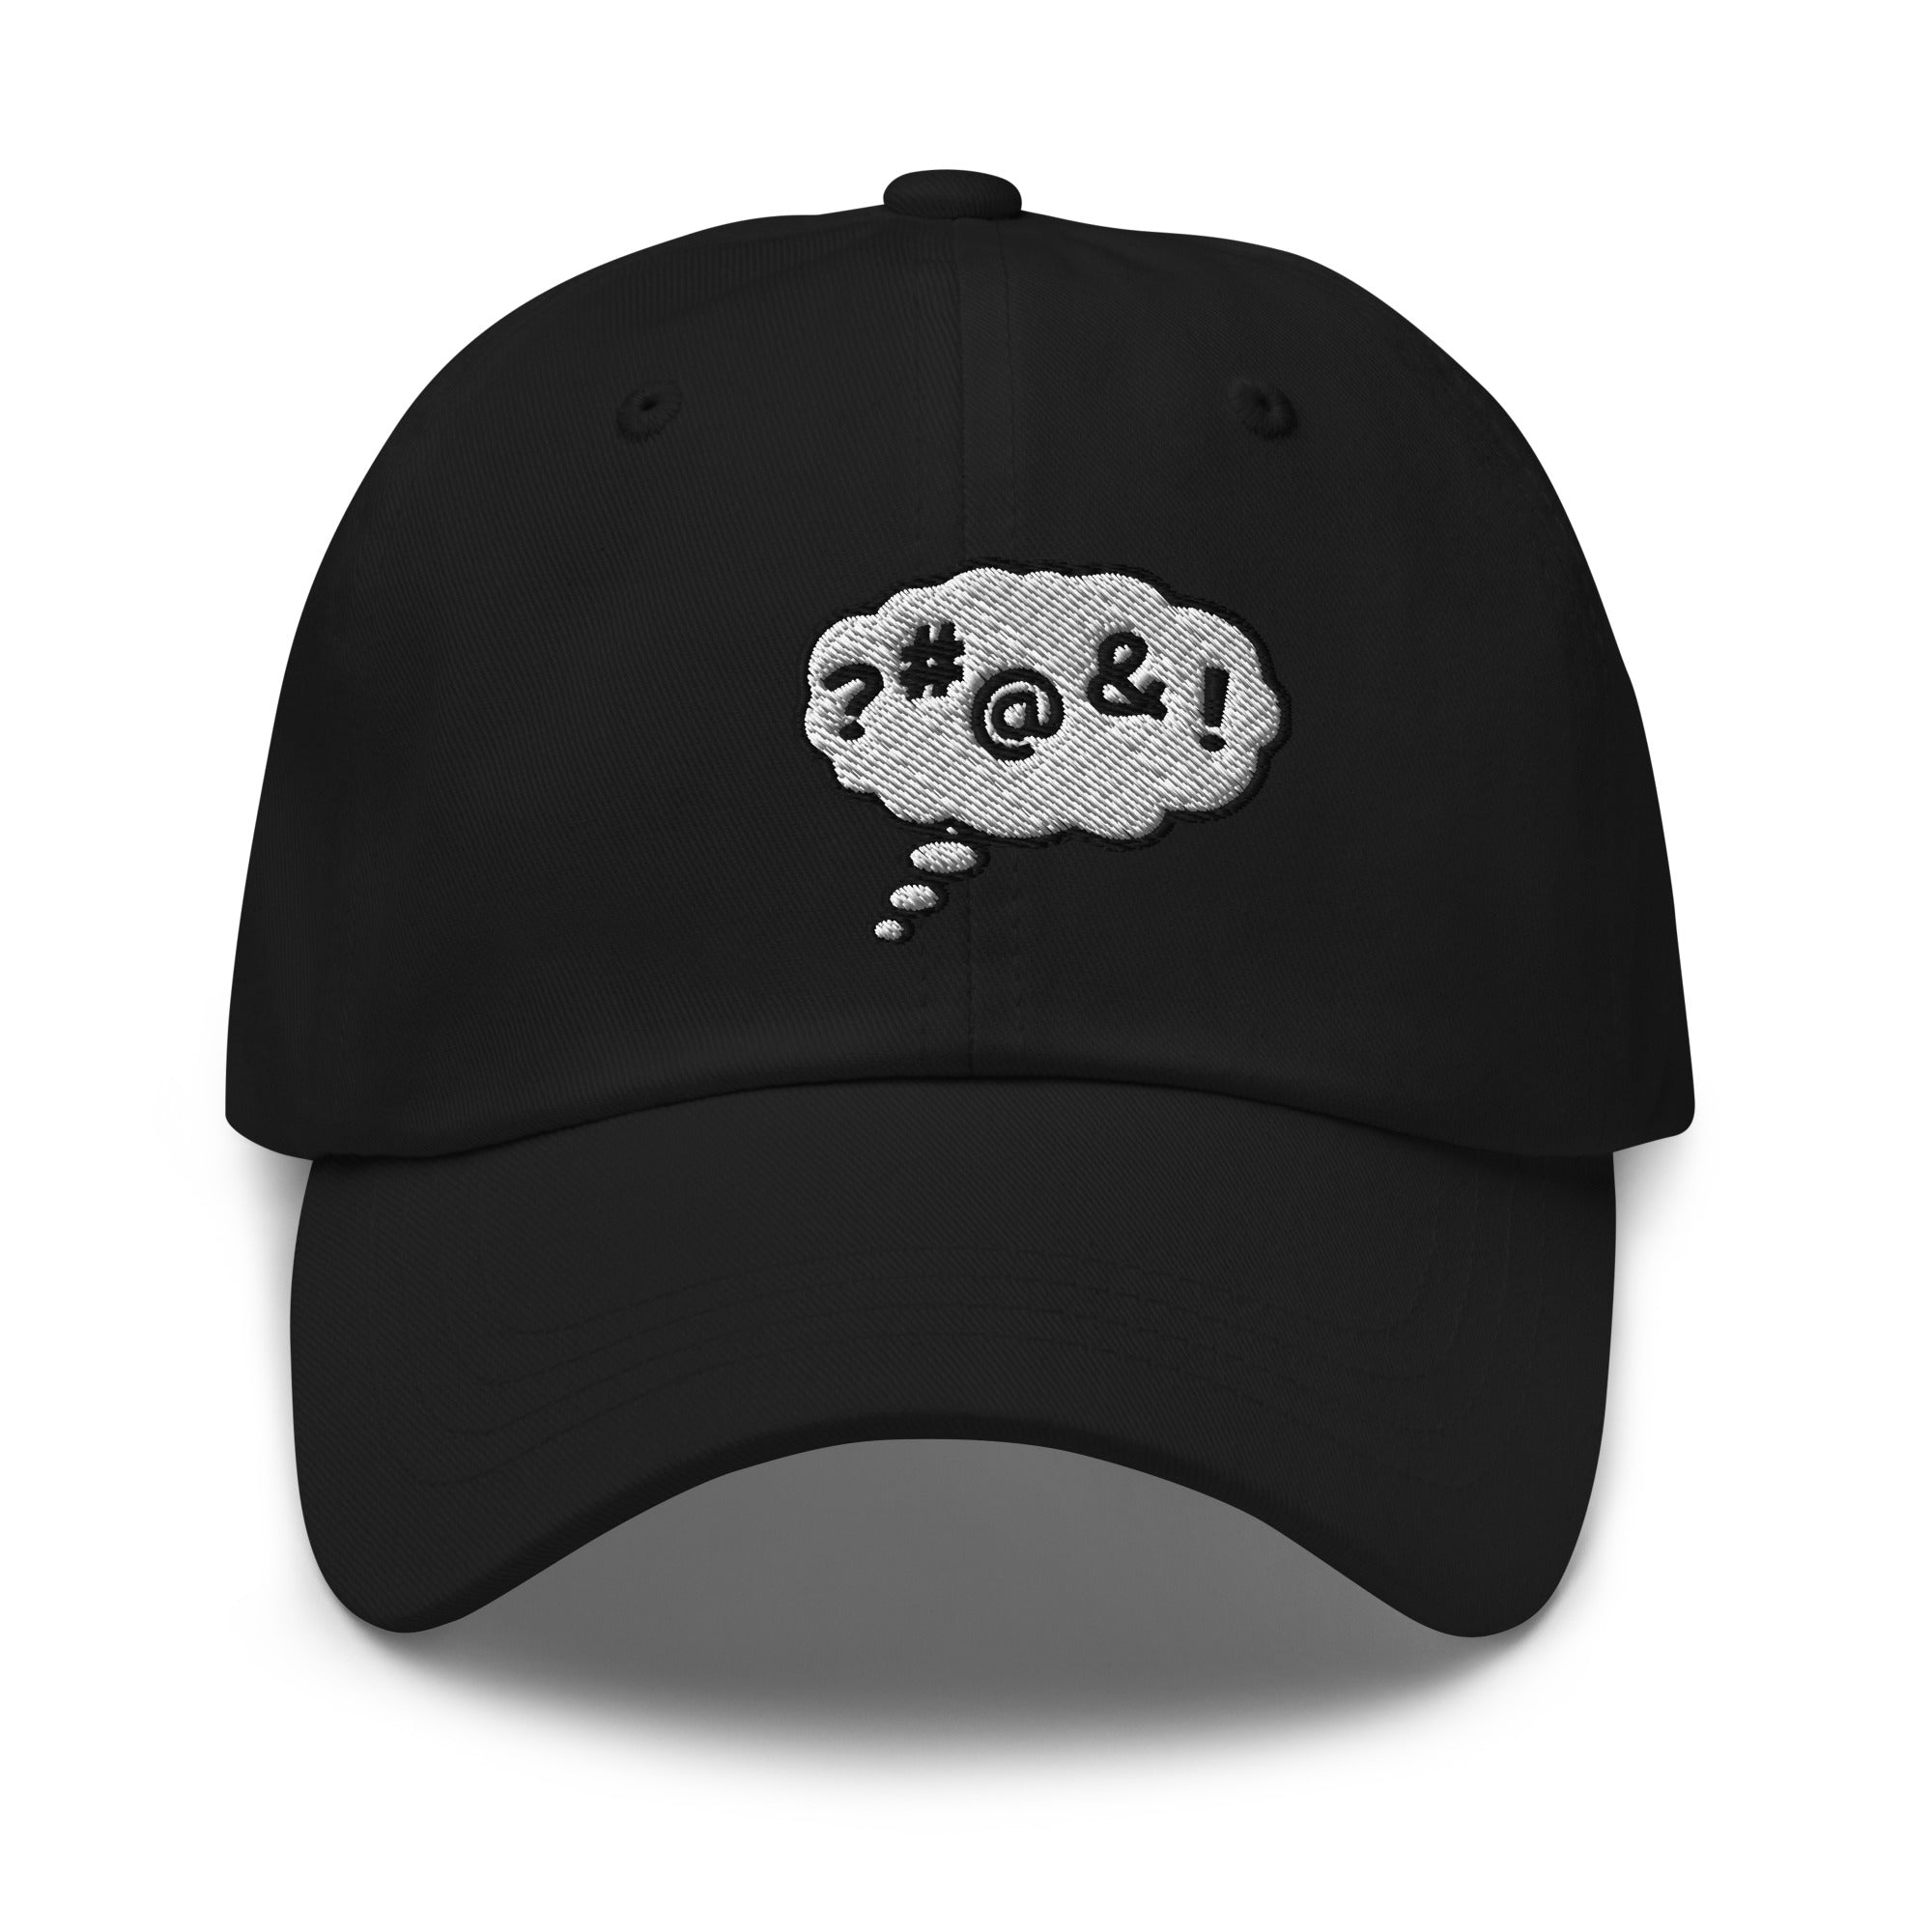 Anime Comic Bubble Explicit Language Embroidered Baseball Cap Dad hat - Edge of Life Designs